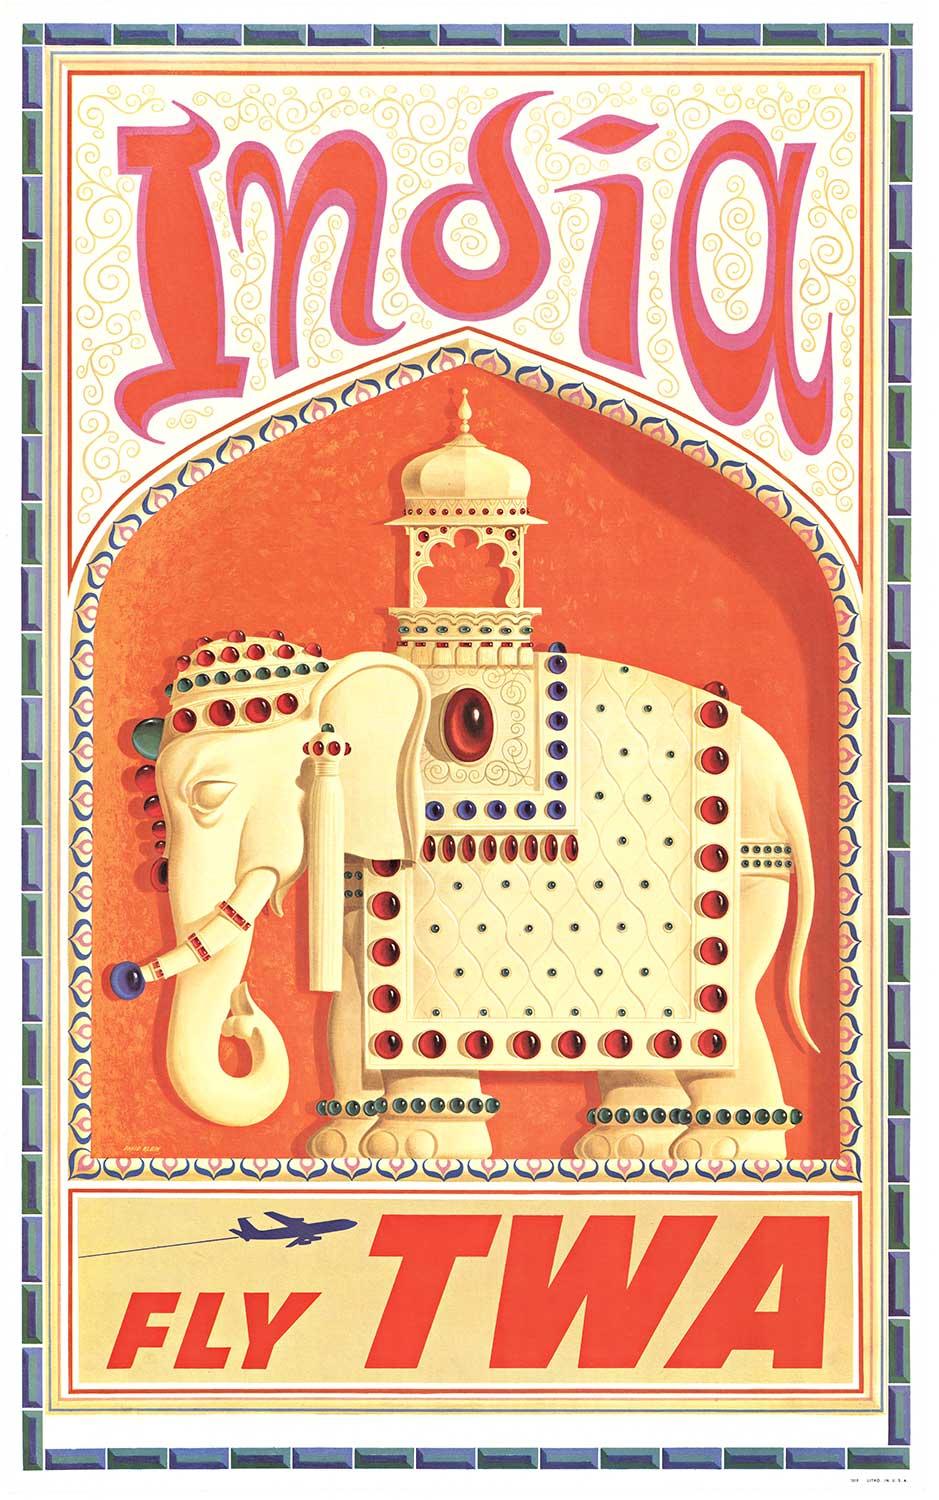 Original Fly TWA India vintage travel poster.    Artist:   David Klein.   Archival linen backed in very fine condition, ready to frame.

This poster features an elephant adorned in jewels with a howdah on the top for the passenger.    The elephant’s